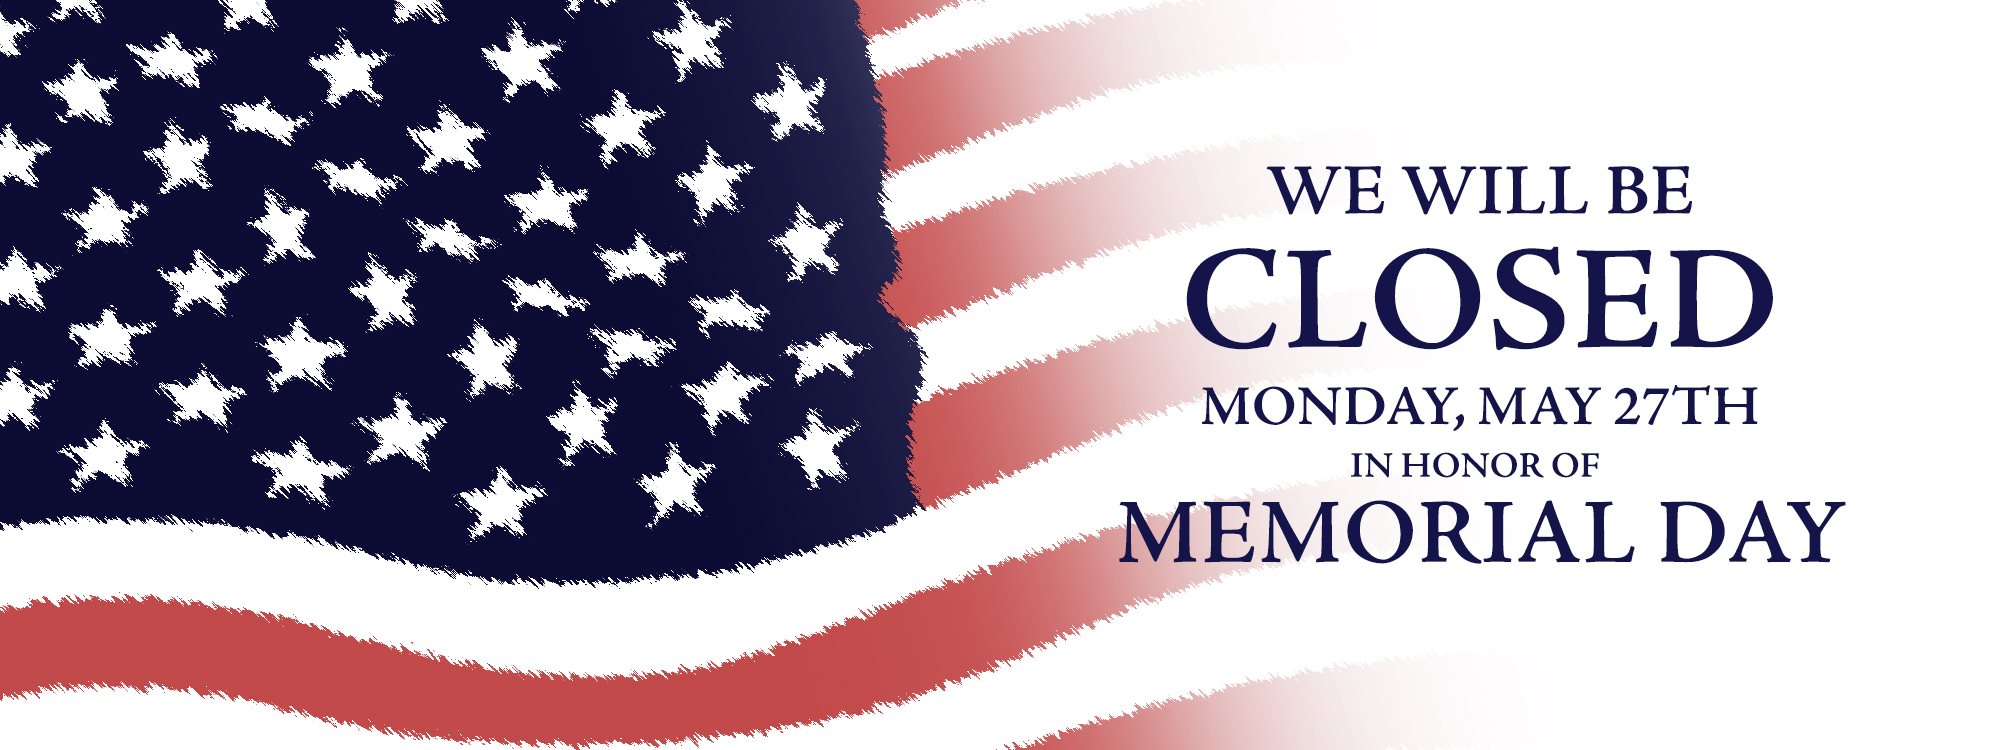 We will be closed May 27th for Memorial Day